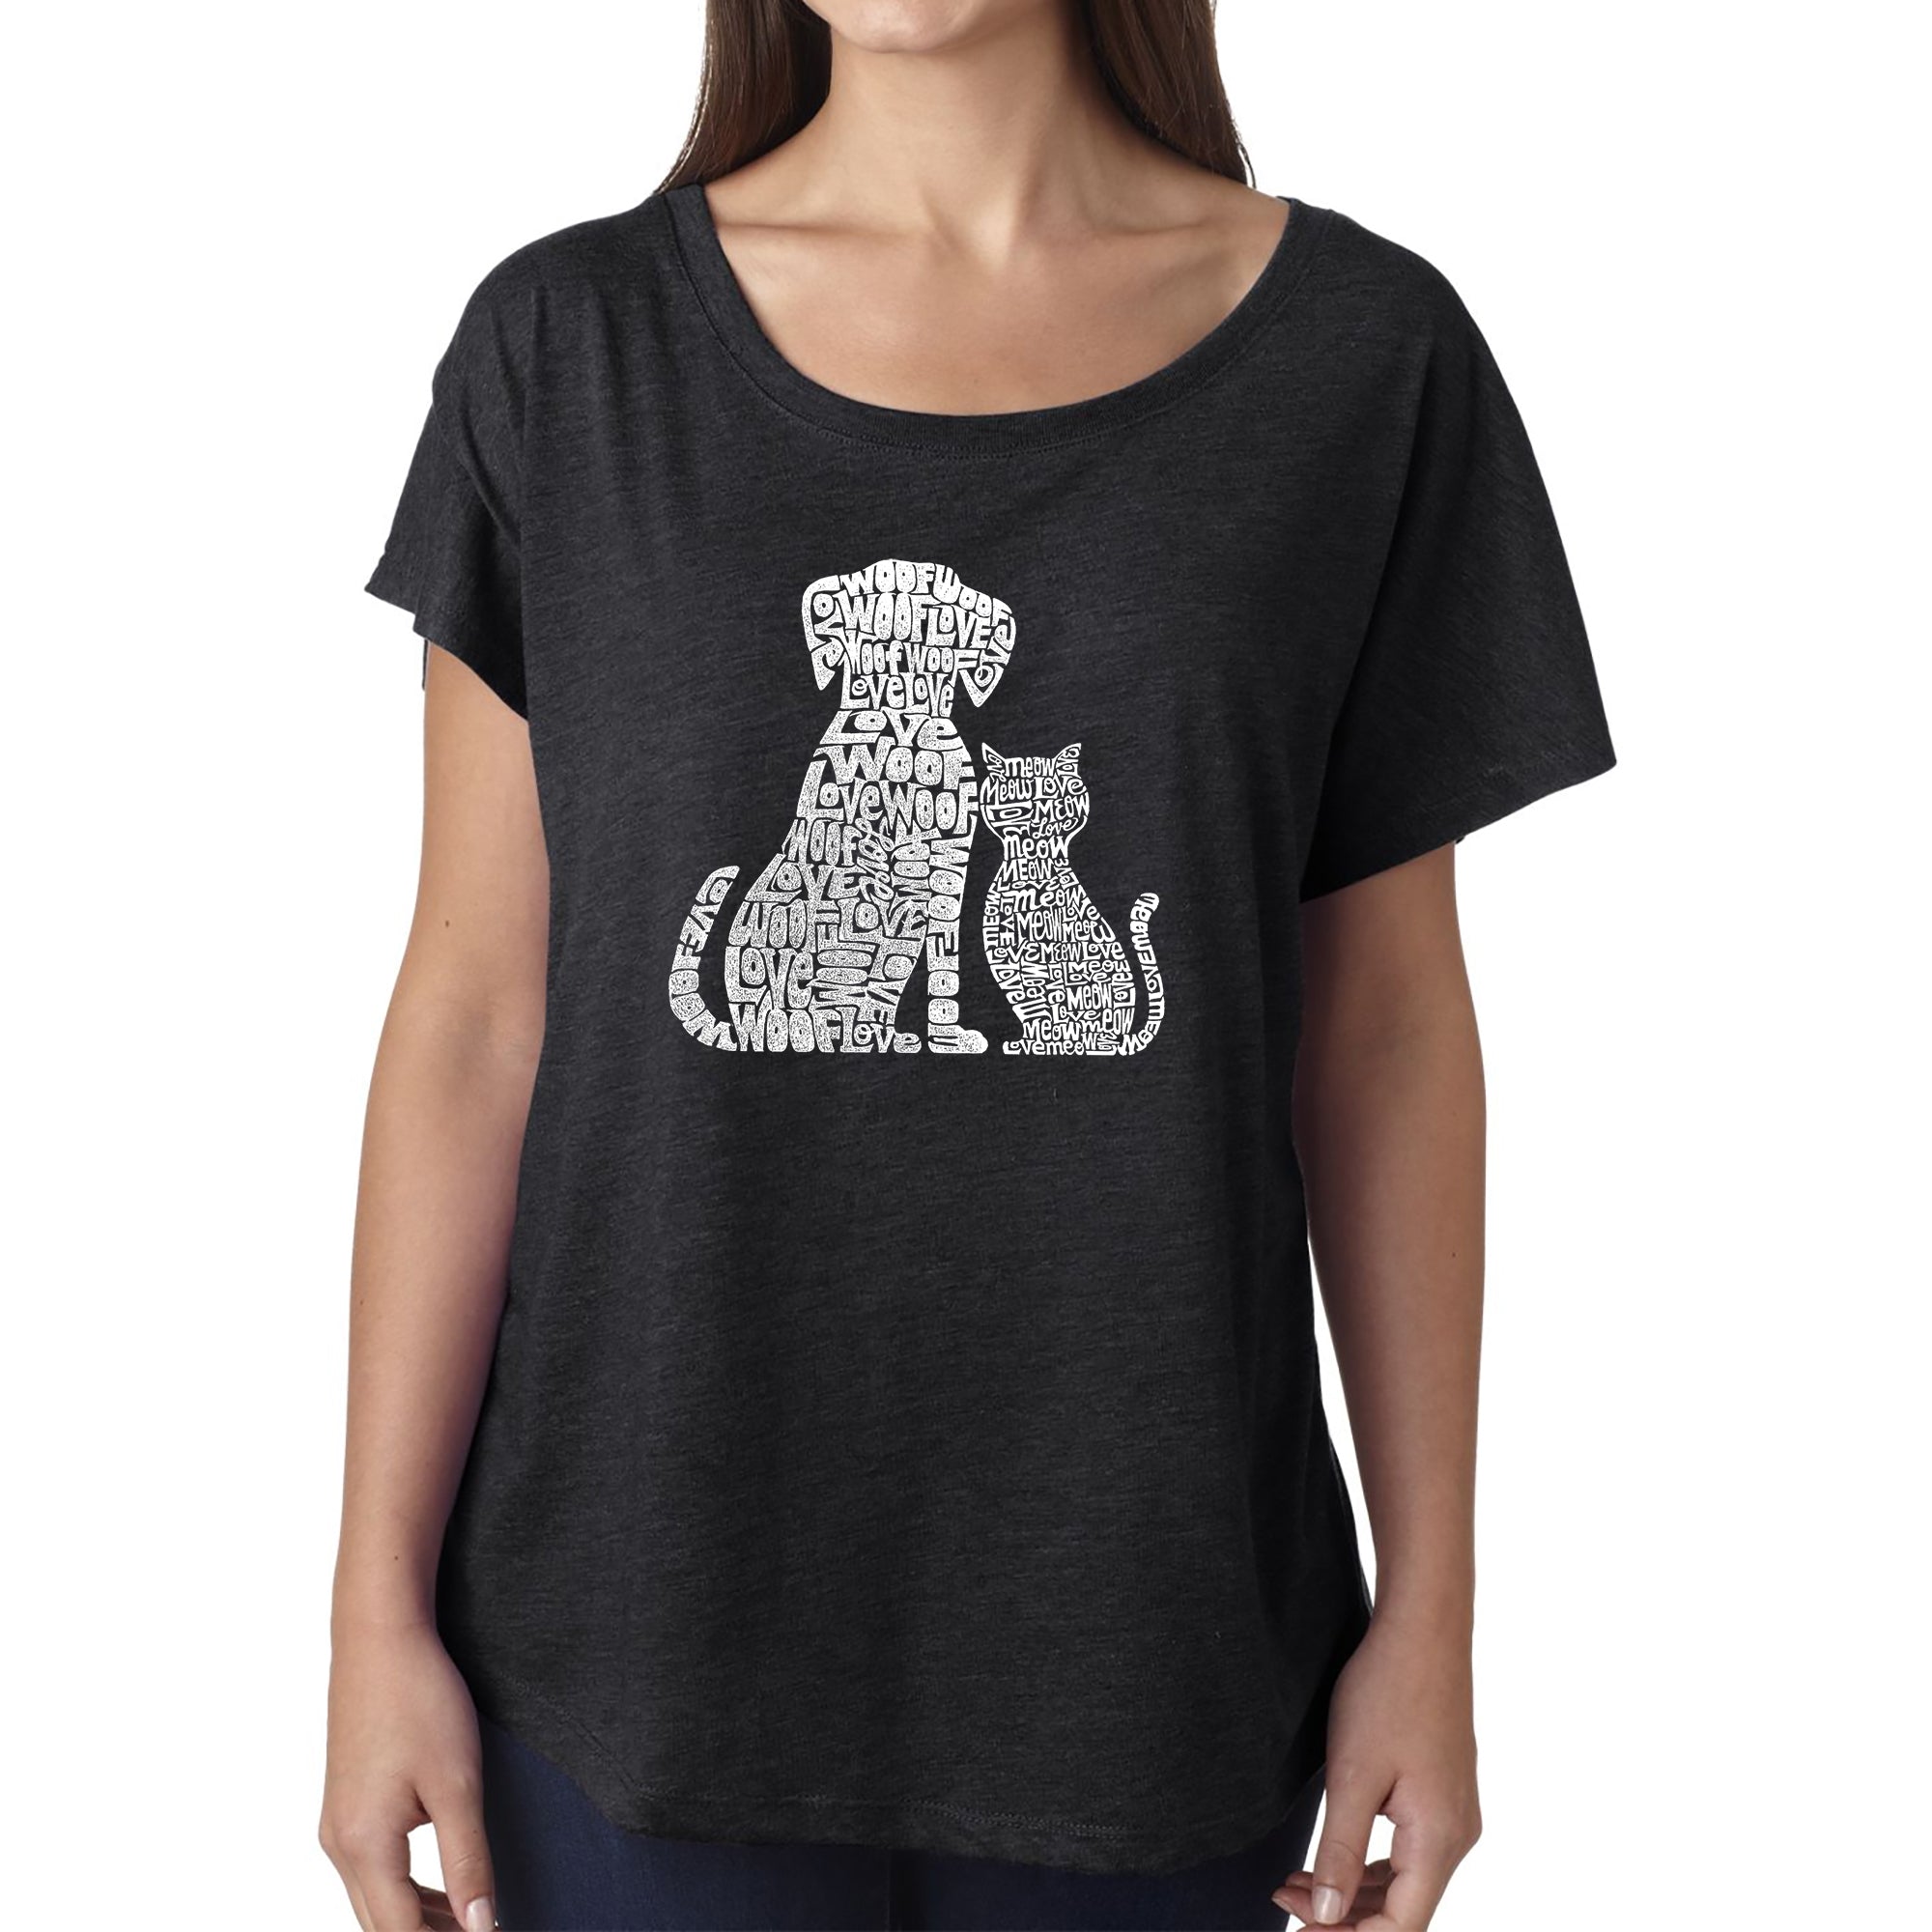 Dogs And Cats - Women's Loose Fit Dolman Cut Word Art Shirt - Navy - X-Large